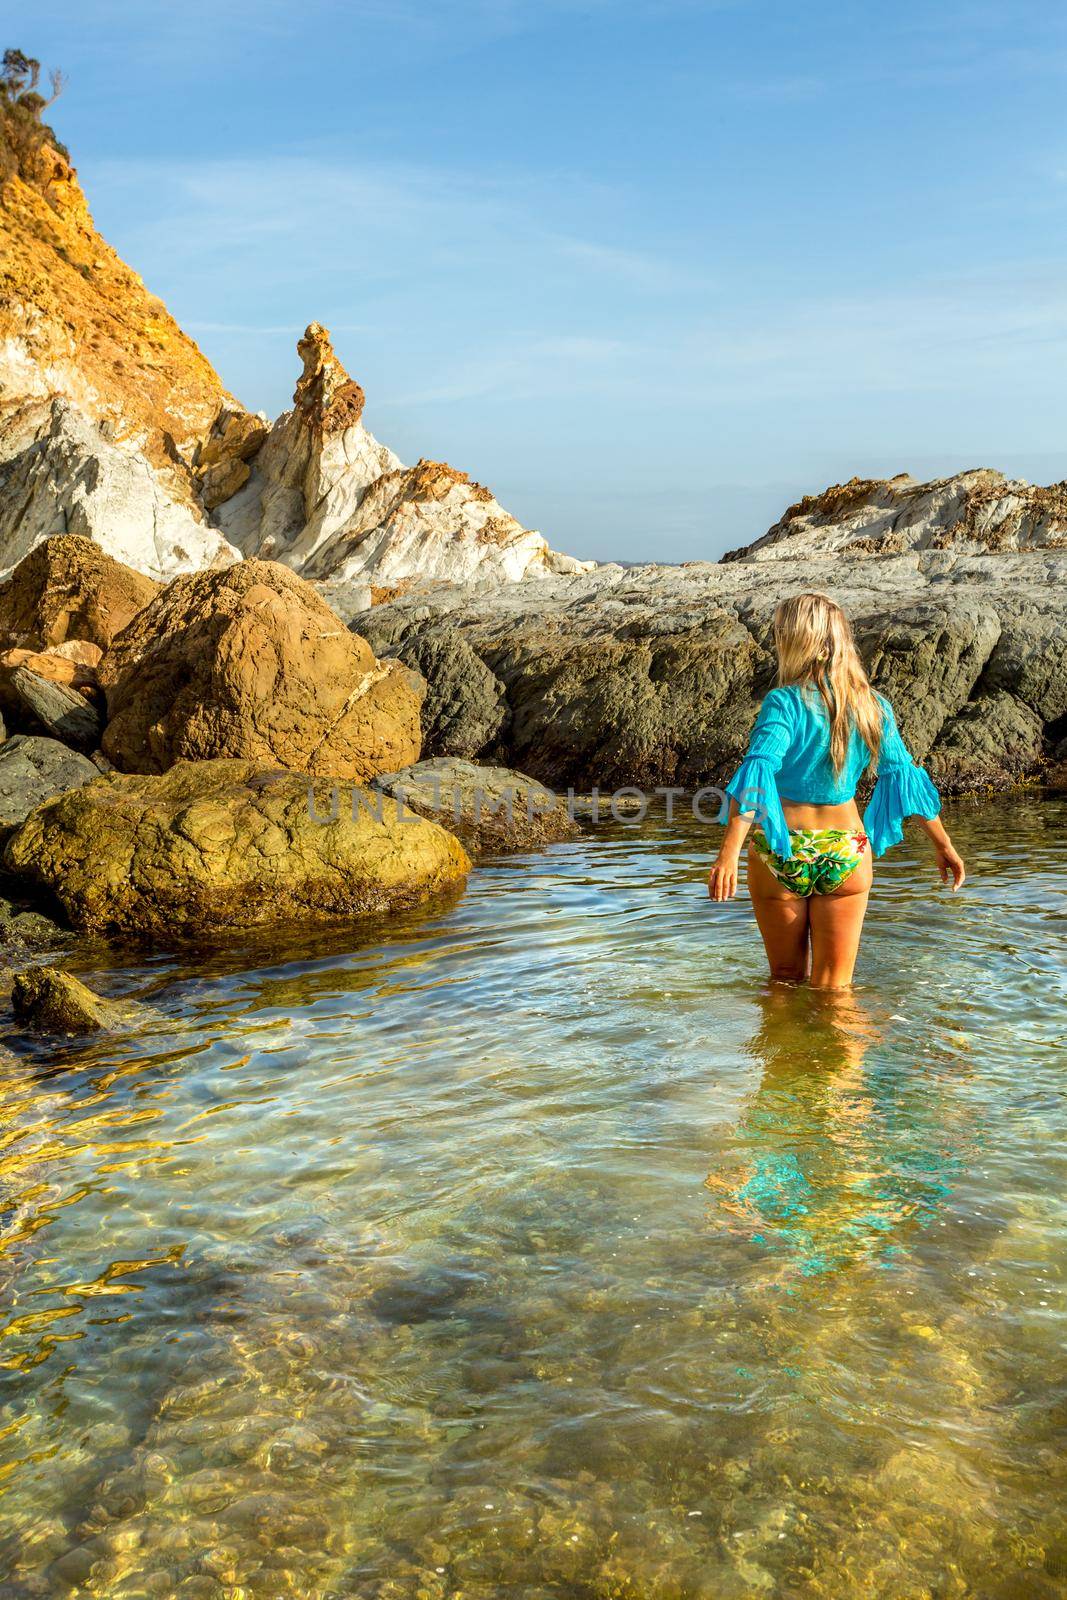 Woman wading into natural rock pool in early morning light.  She is wearing a swimming costume and bright blue midriff top.  Recreation, leisure, travel or tourism